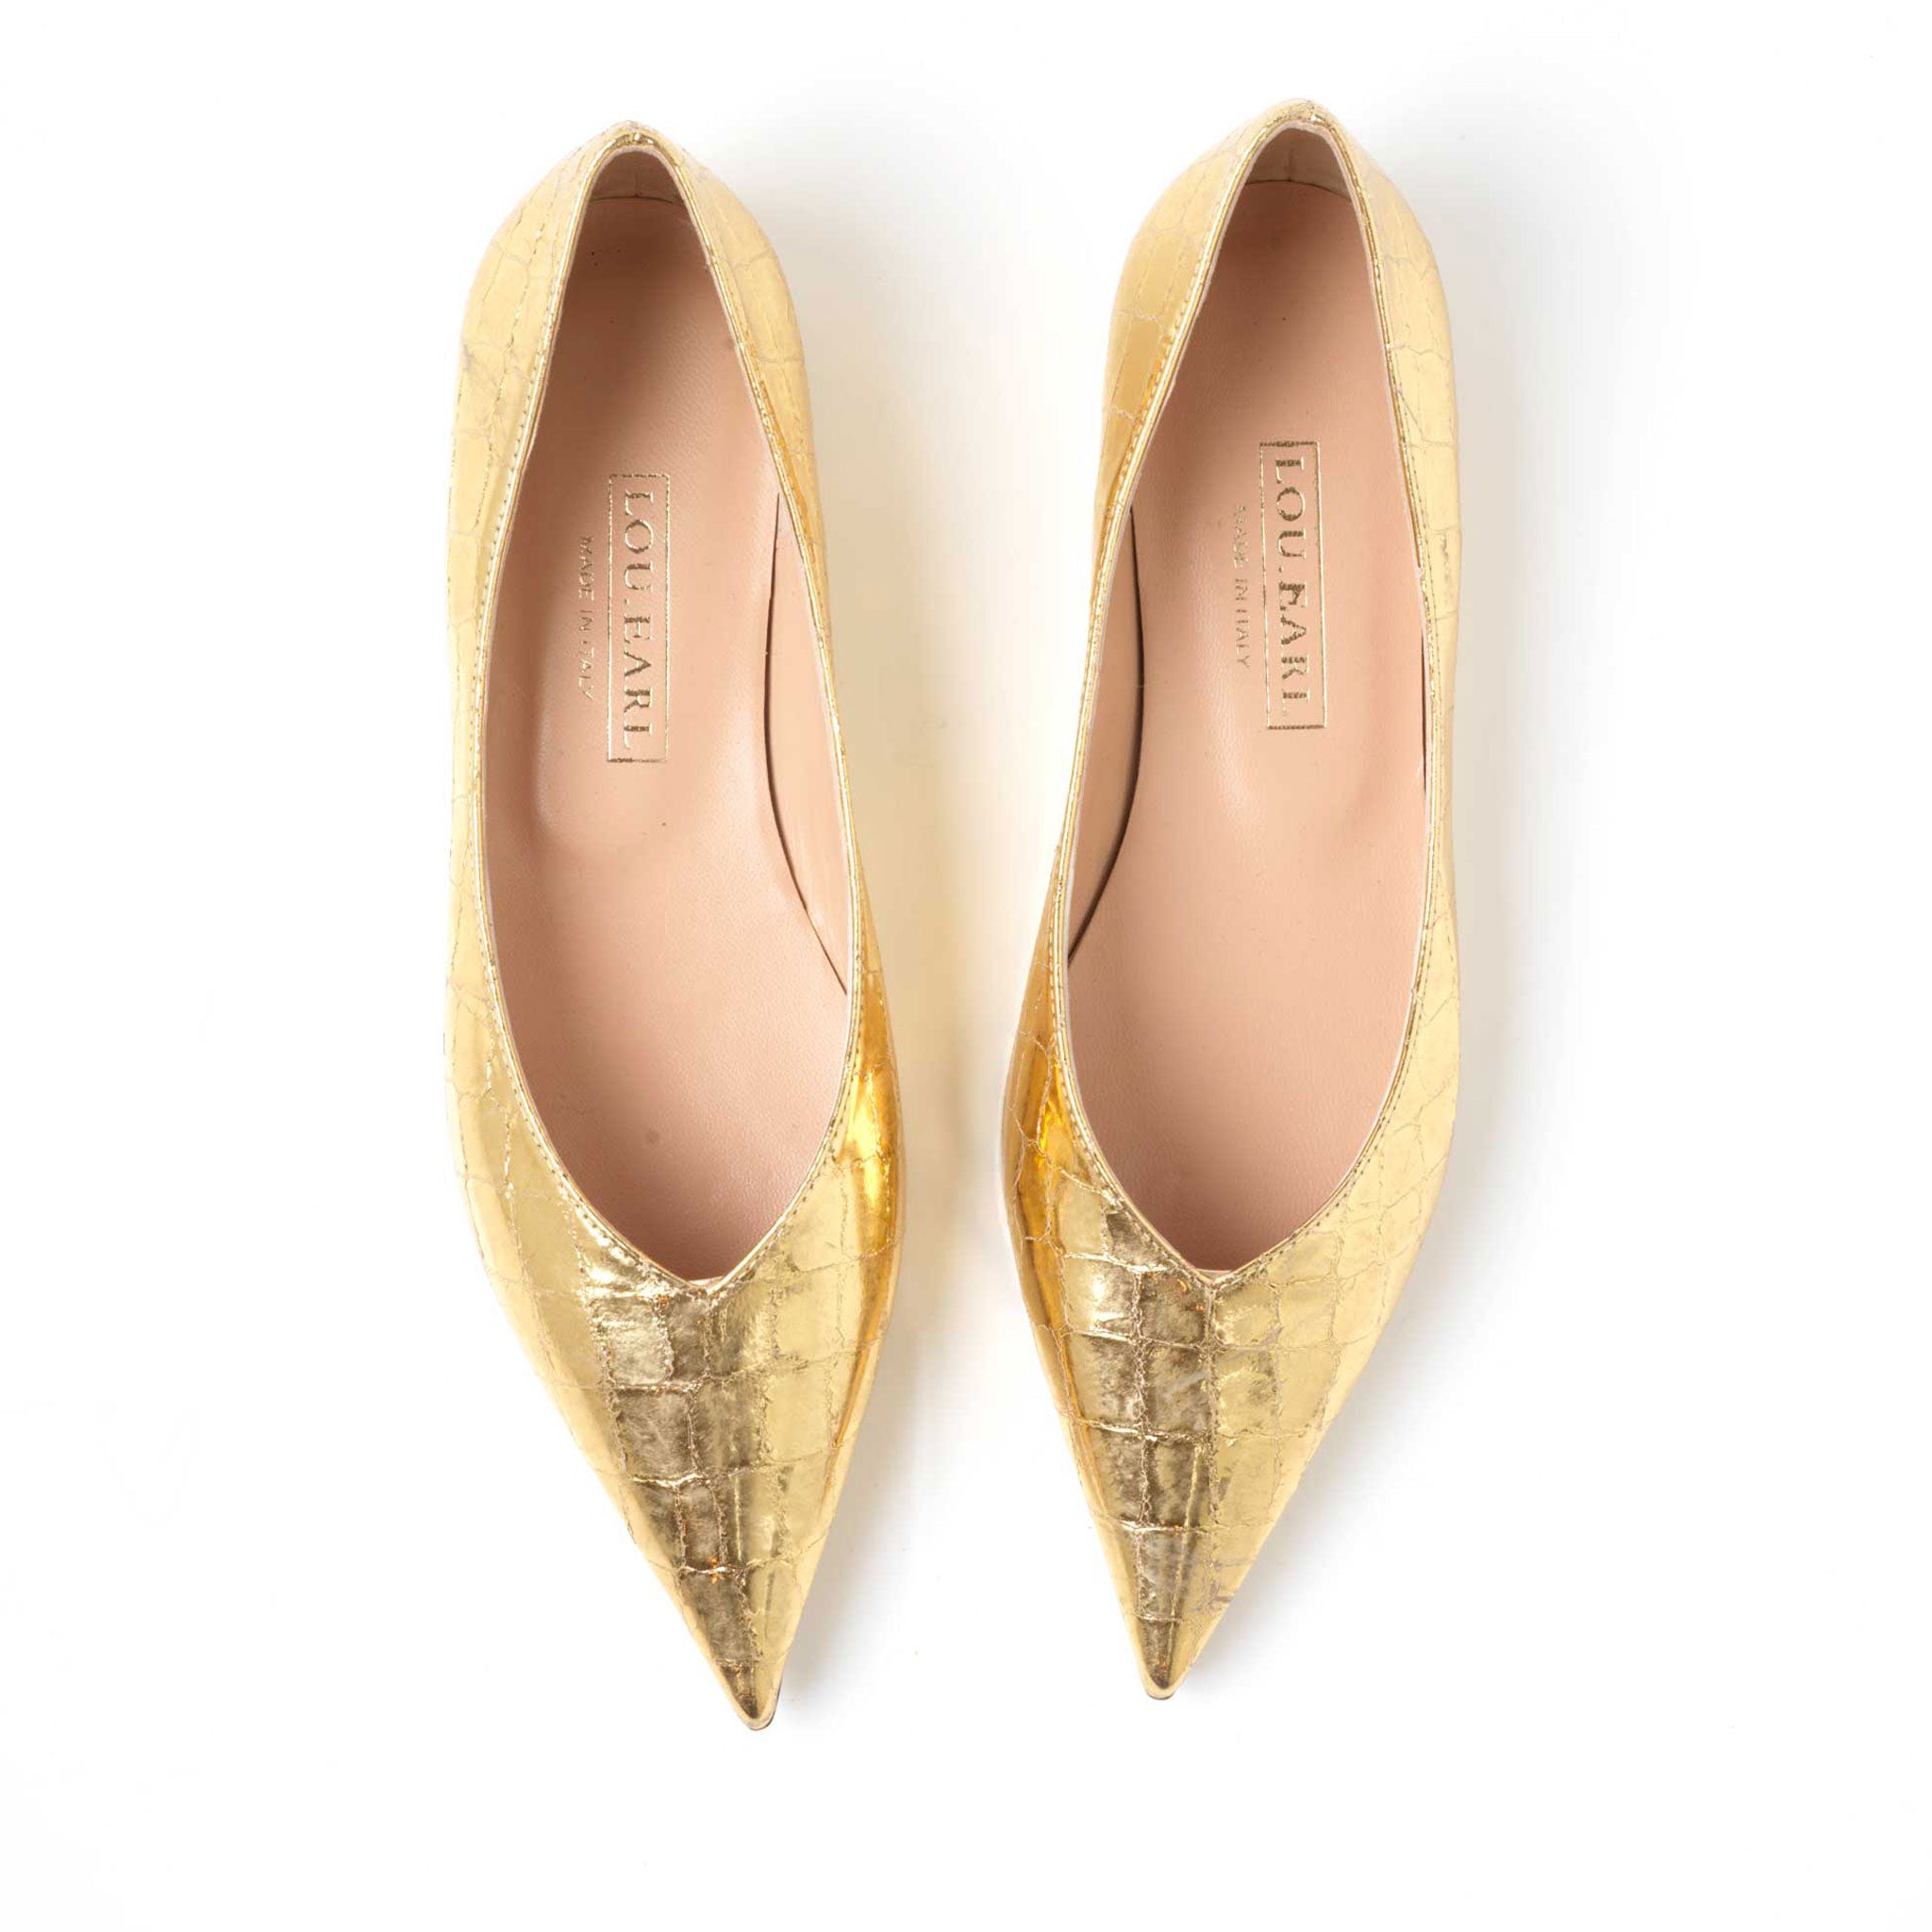 slip on gold shoes with a super pointed toe